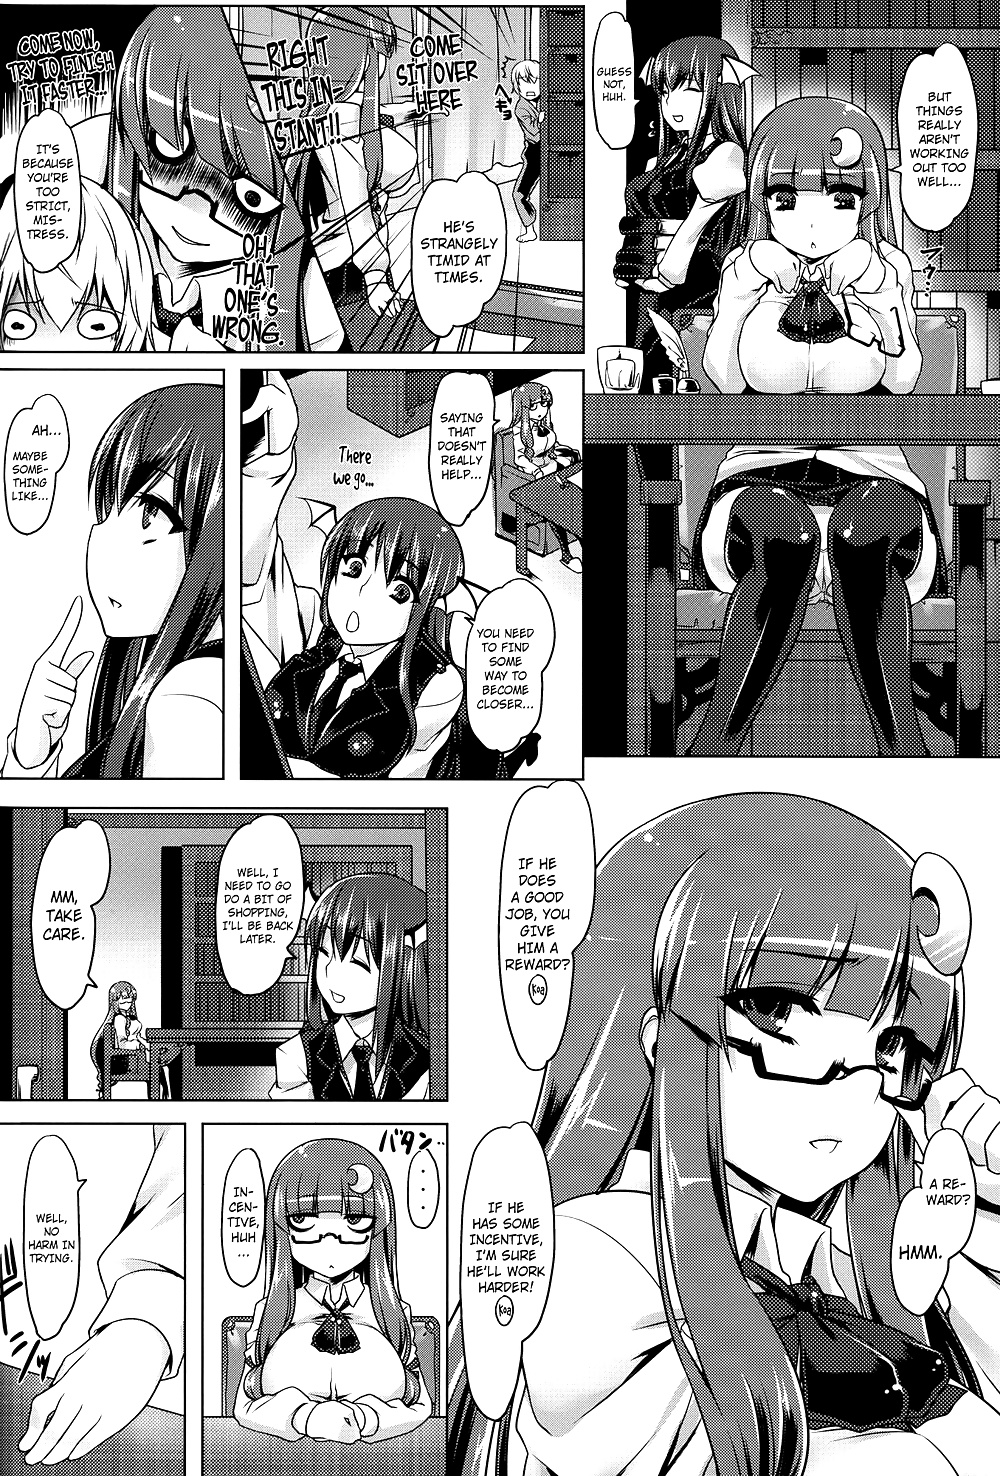 Project Shrine Maiden - Teach Me With Your Anus, Patchouli #28692772